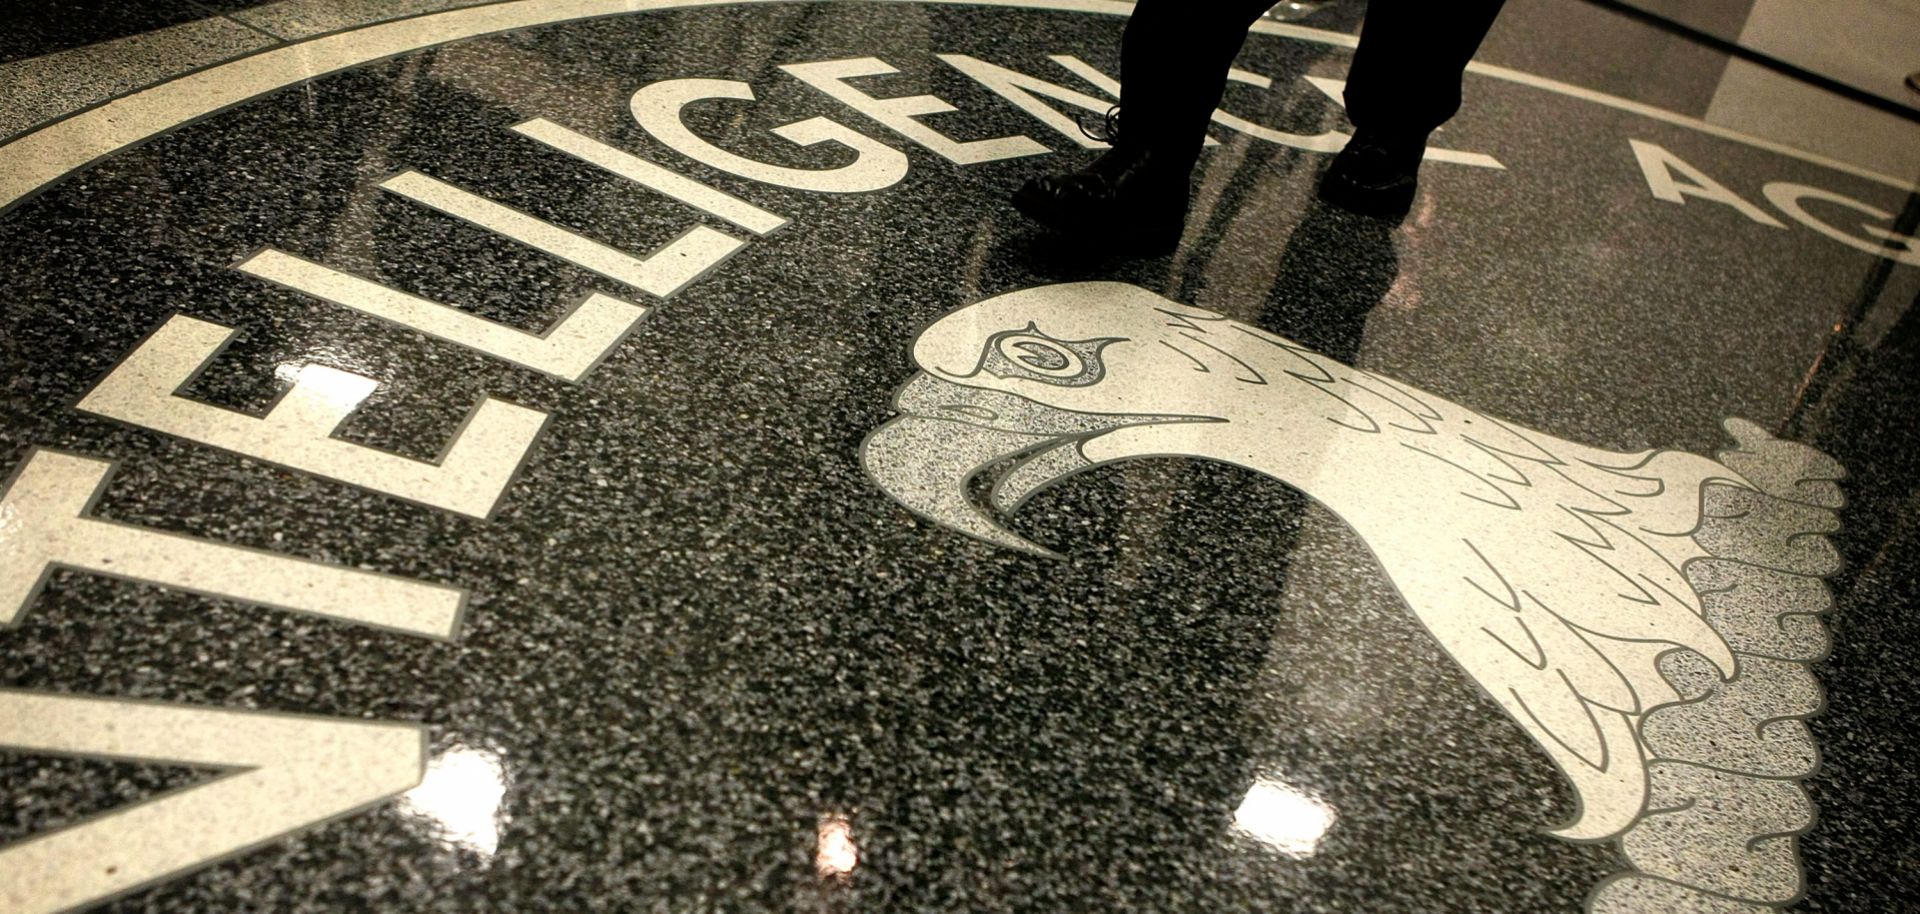  A man walks across the seal of the Central Intelligence Agency at the lobby of the Original Headquarters Building at the CIA headquarters.